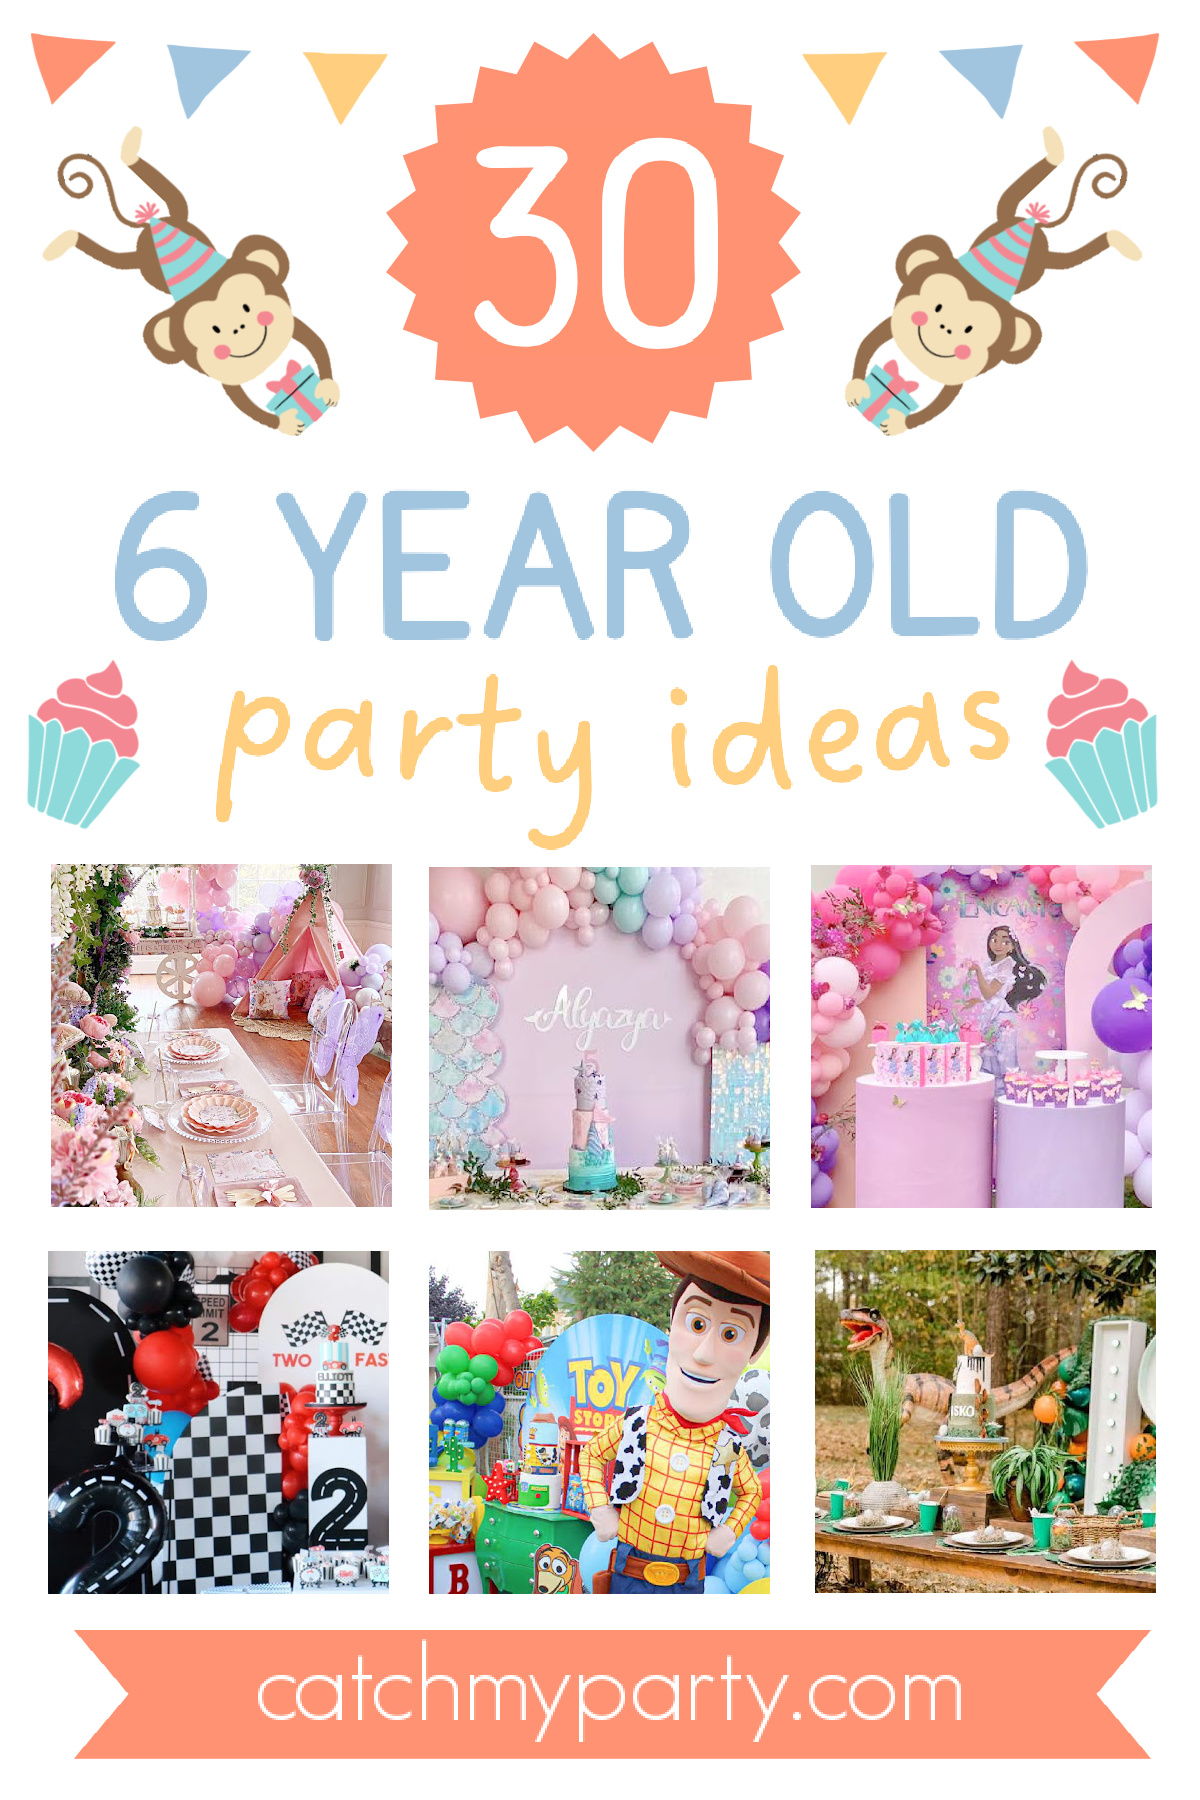 30 Most Pop ular 6 Year Old Party Ideas!